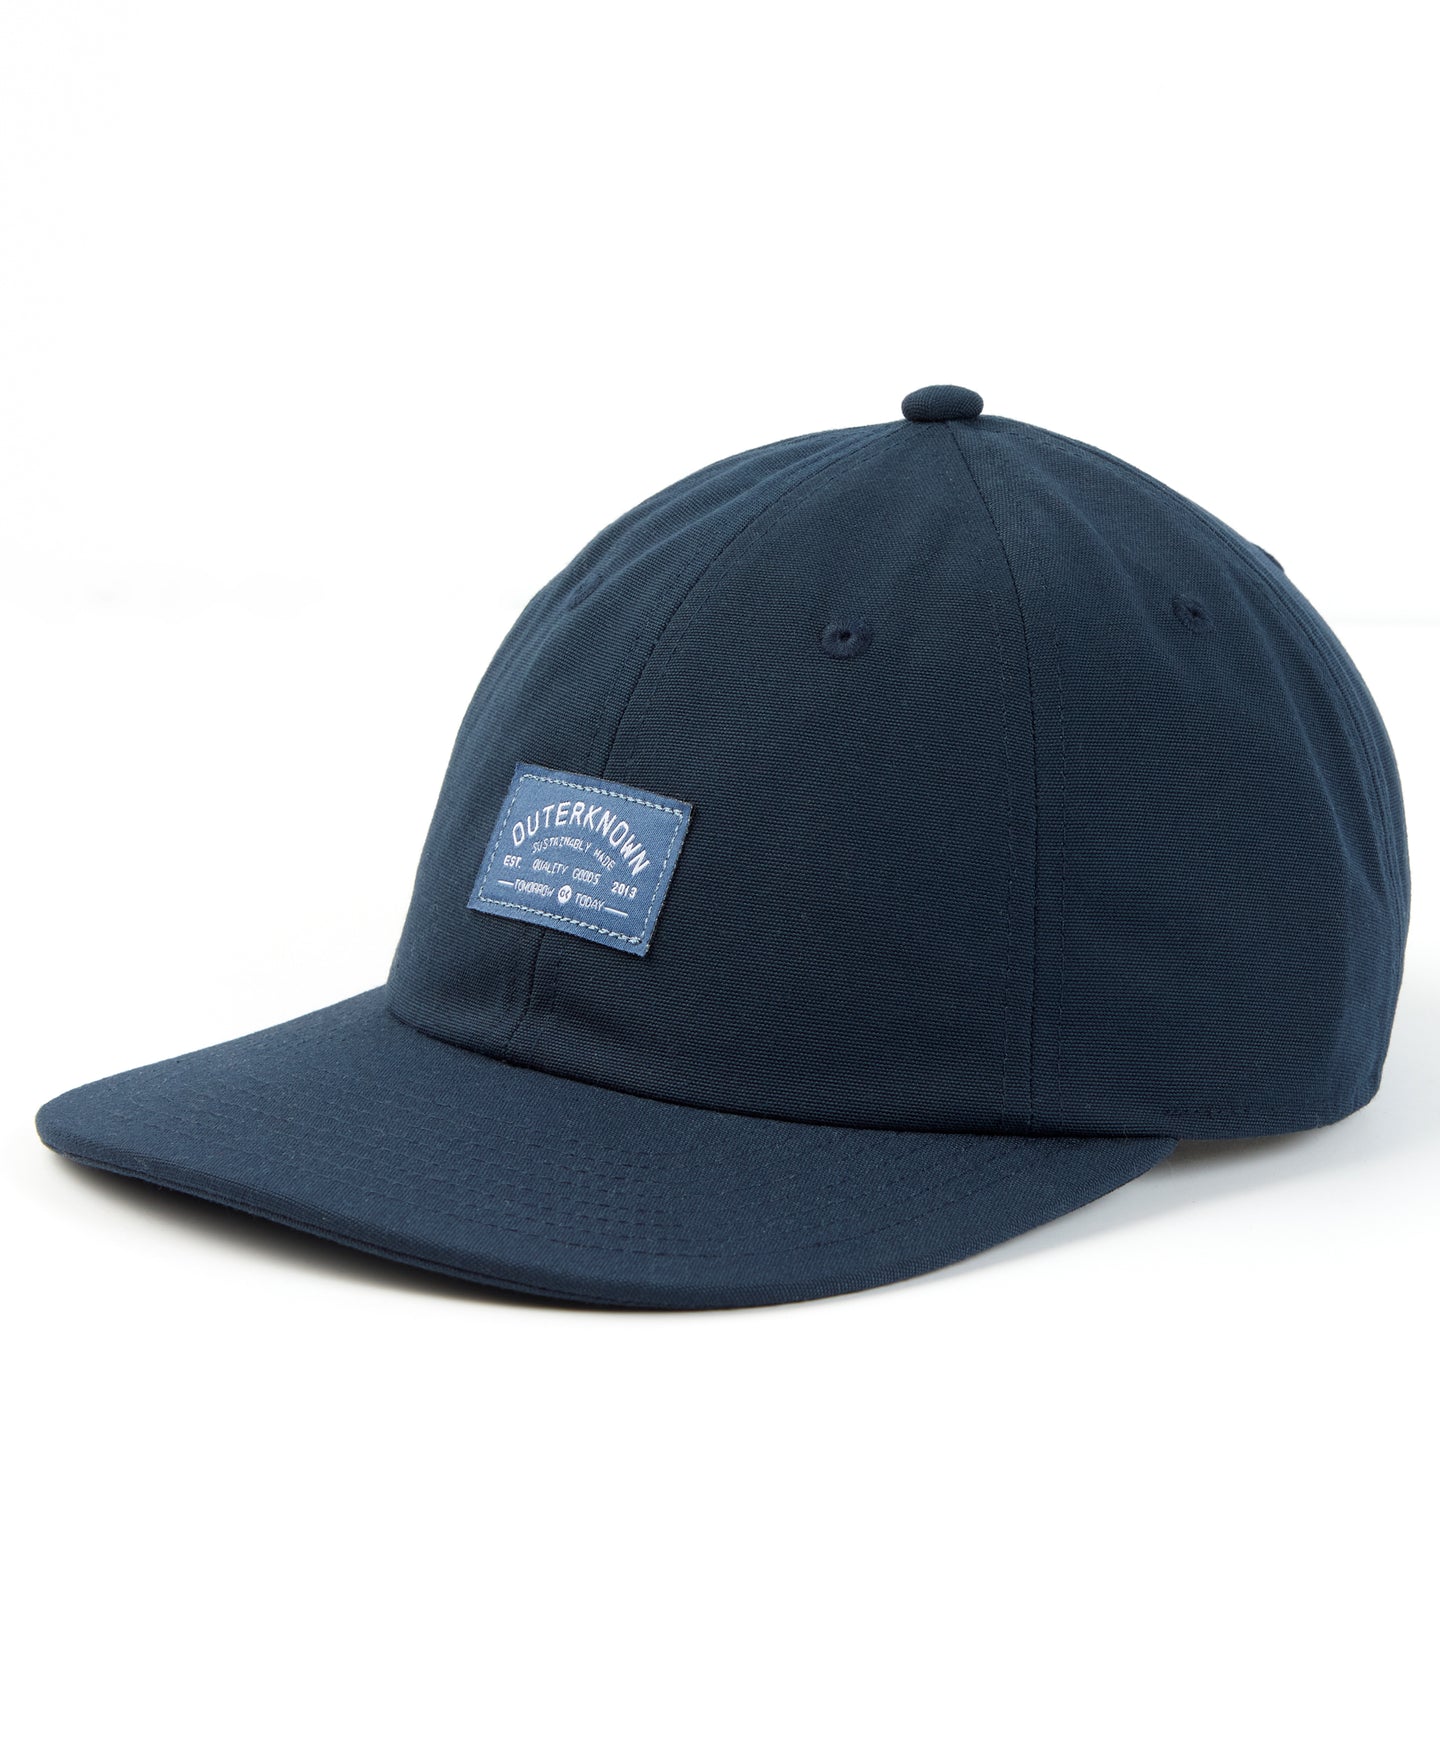 Outerknown - Hats - INDUSTRIAL CAMP HAT-NAVY-19402302-OUTERKNOWN